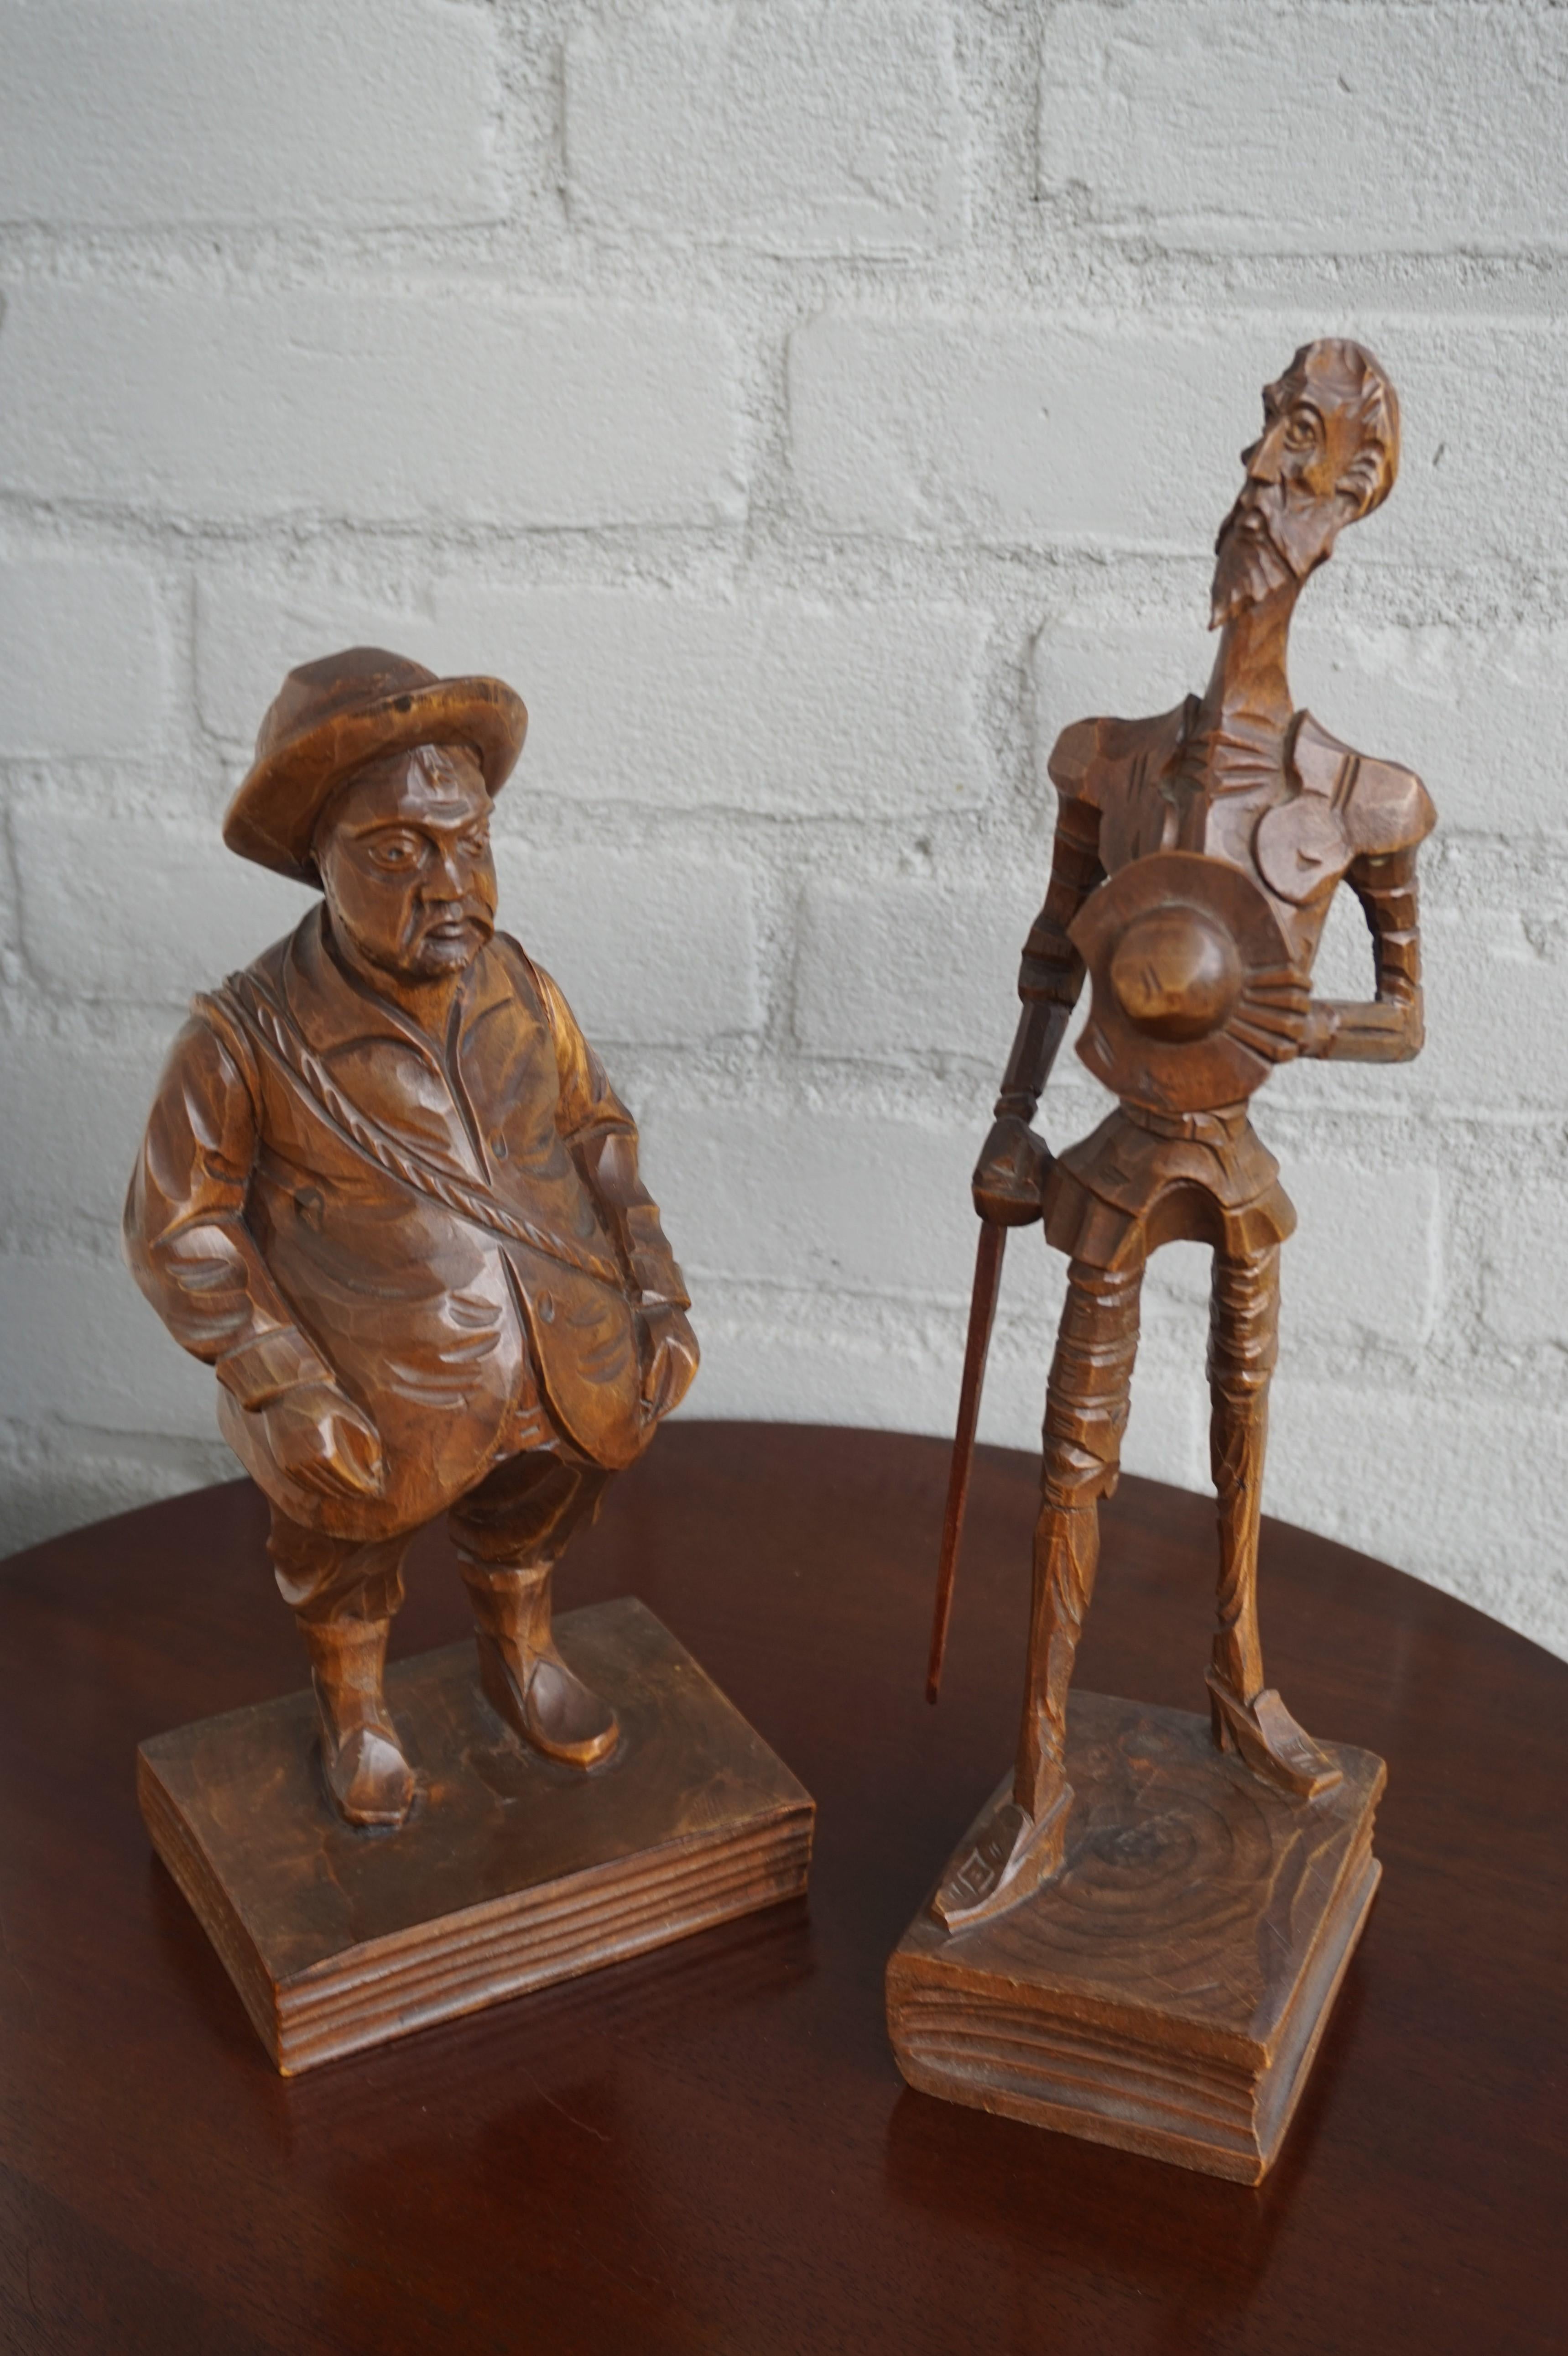 Wood Hand Carved Don Quixote and Sancho Panza Sculptures from the Arts & Crafts Era